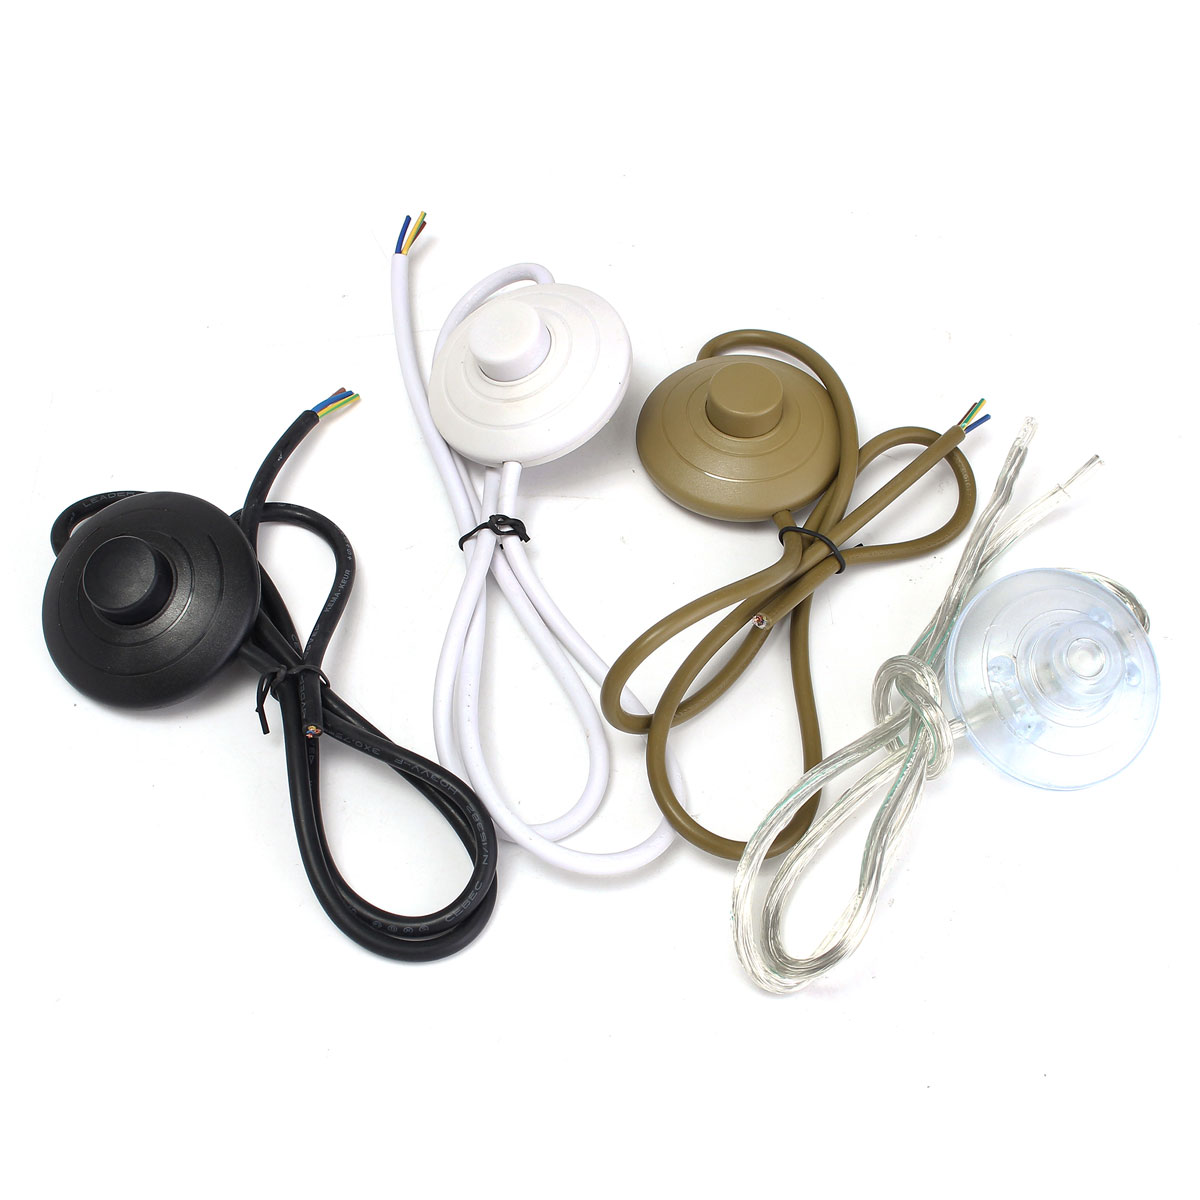 Find 1M Circular Lighting Button Switch with 3 Core Inline Flex Cord for Table Desk Lamp for Sale on Gipsybee.com with cryptocurrencies